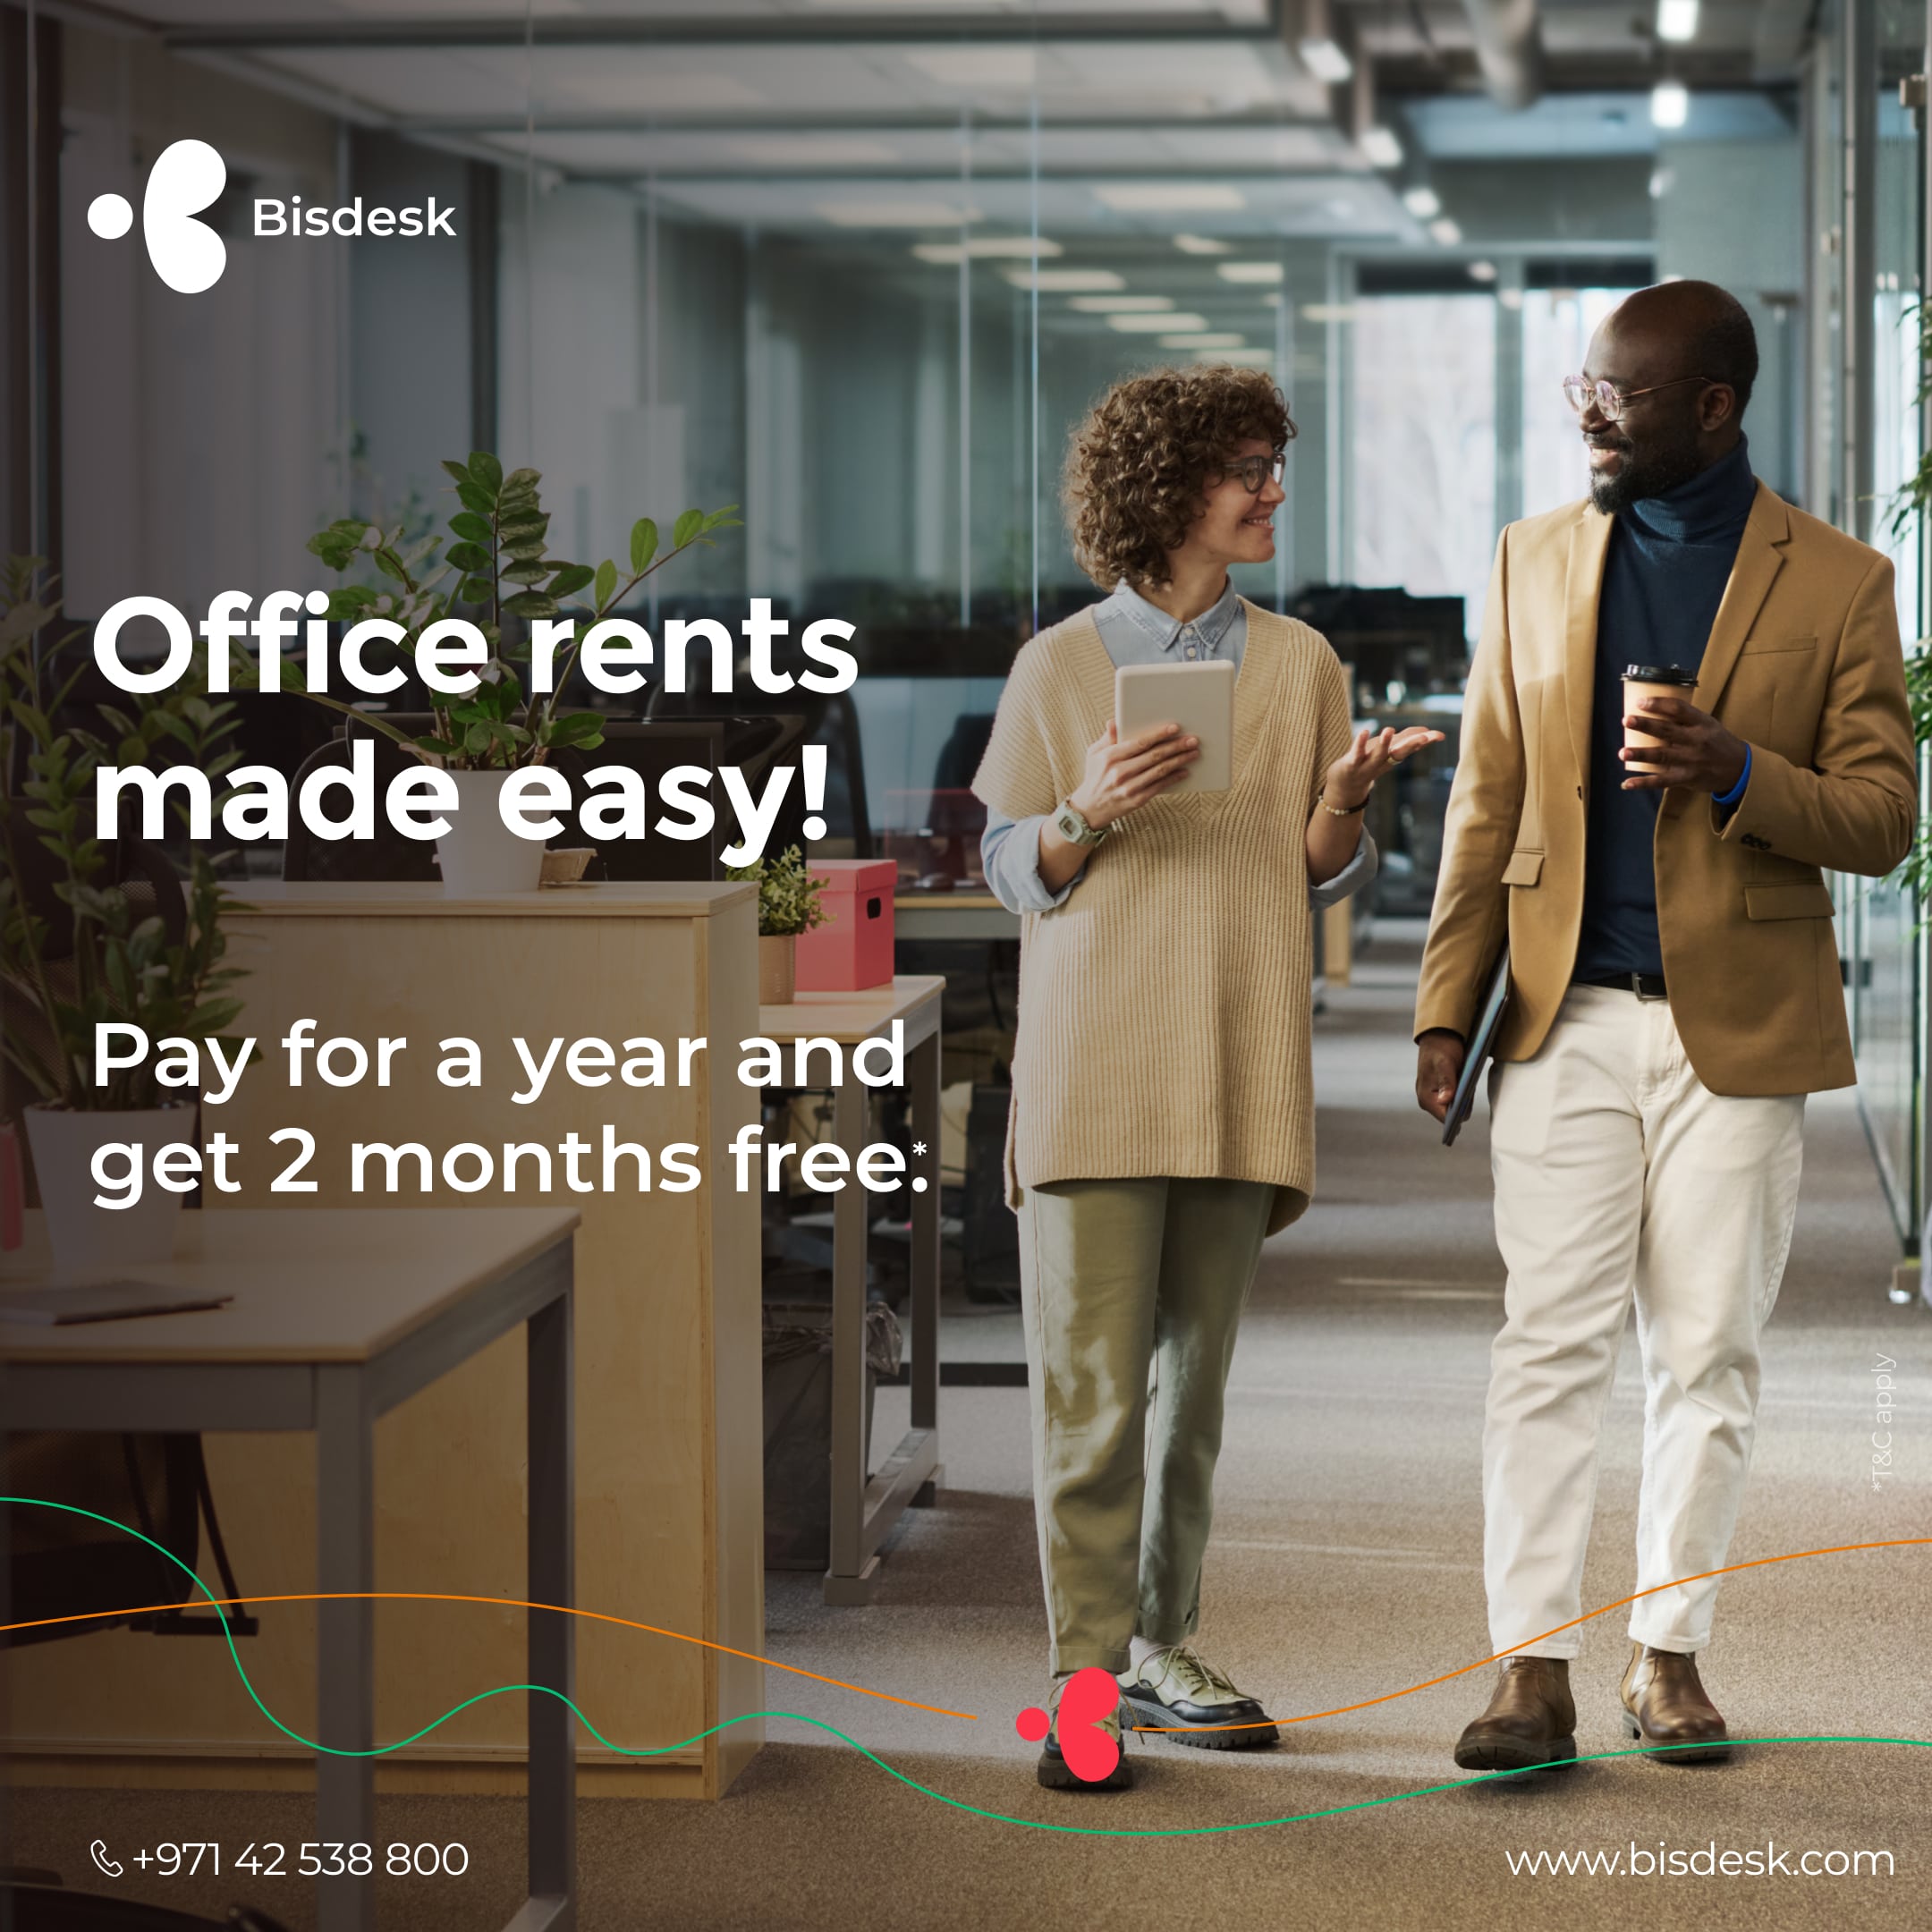 Book Your Office Space for 12 Months and Get 2 Months Free!